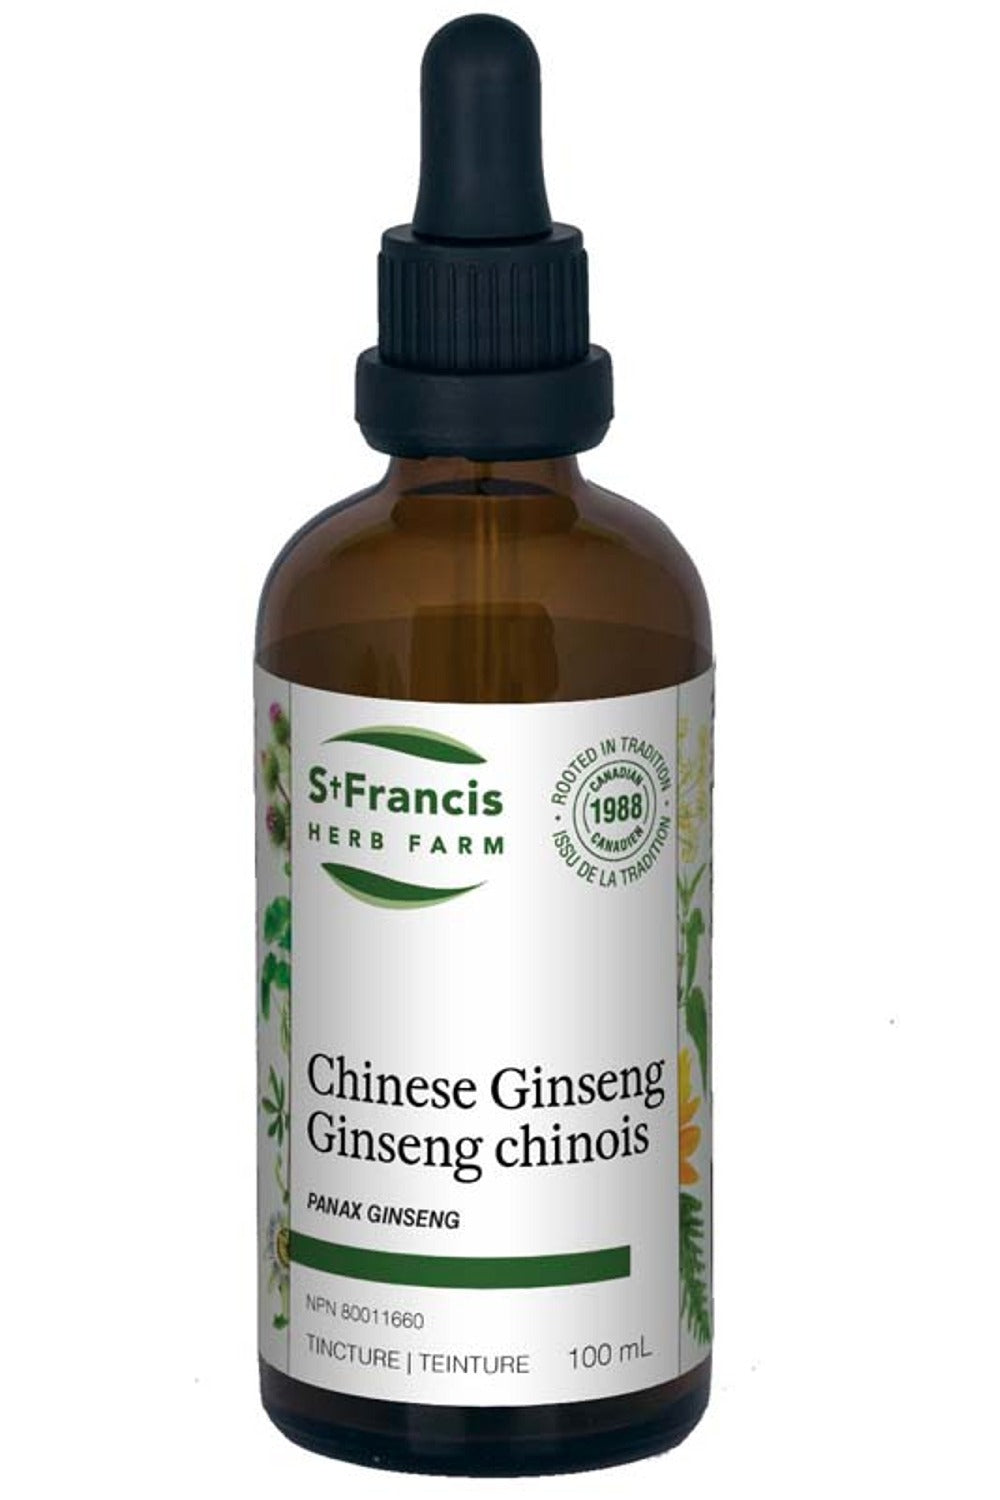 ST FRANCIS HERB FARM Chinese Ginseng (100 ml)